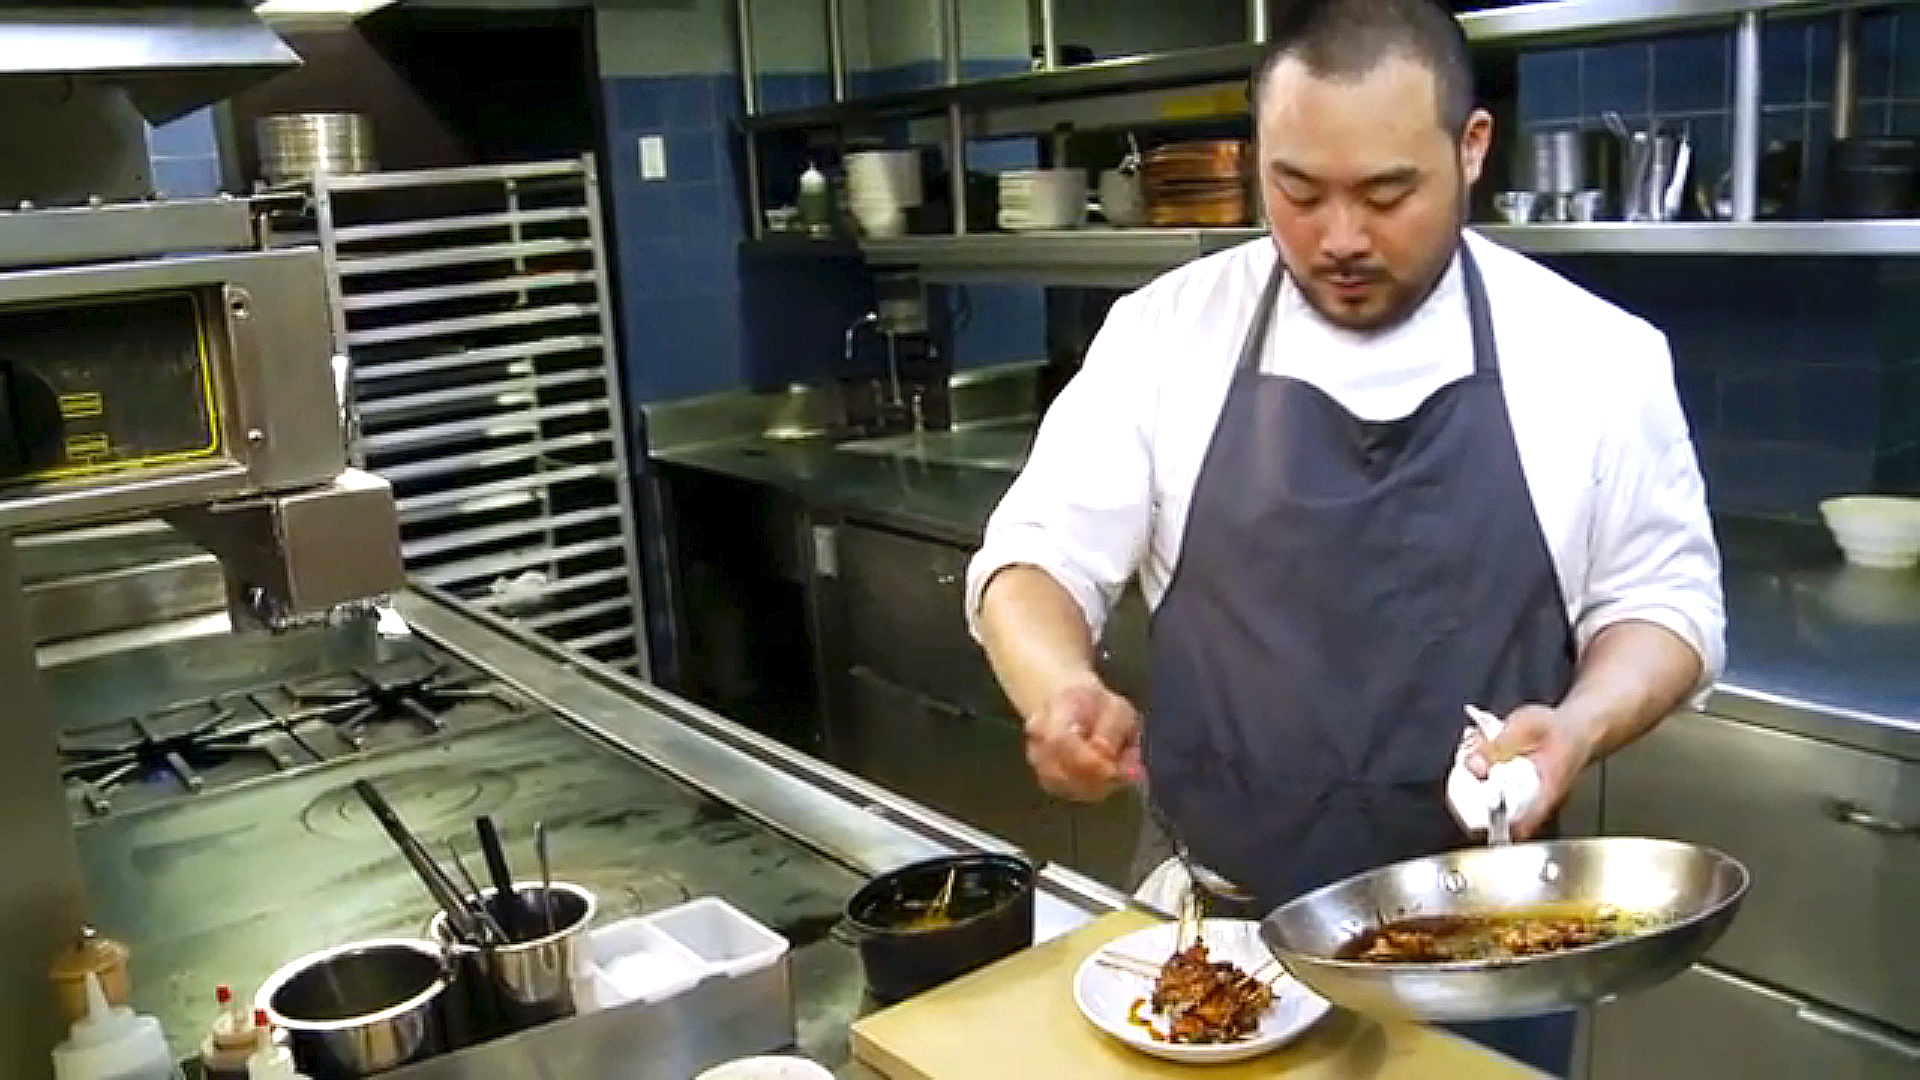 THE MIND OF A CHEF: Chef David Chang prepares a simple dish.